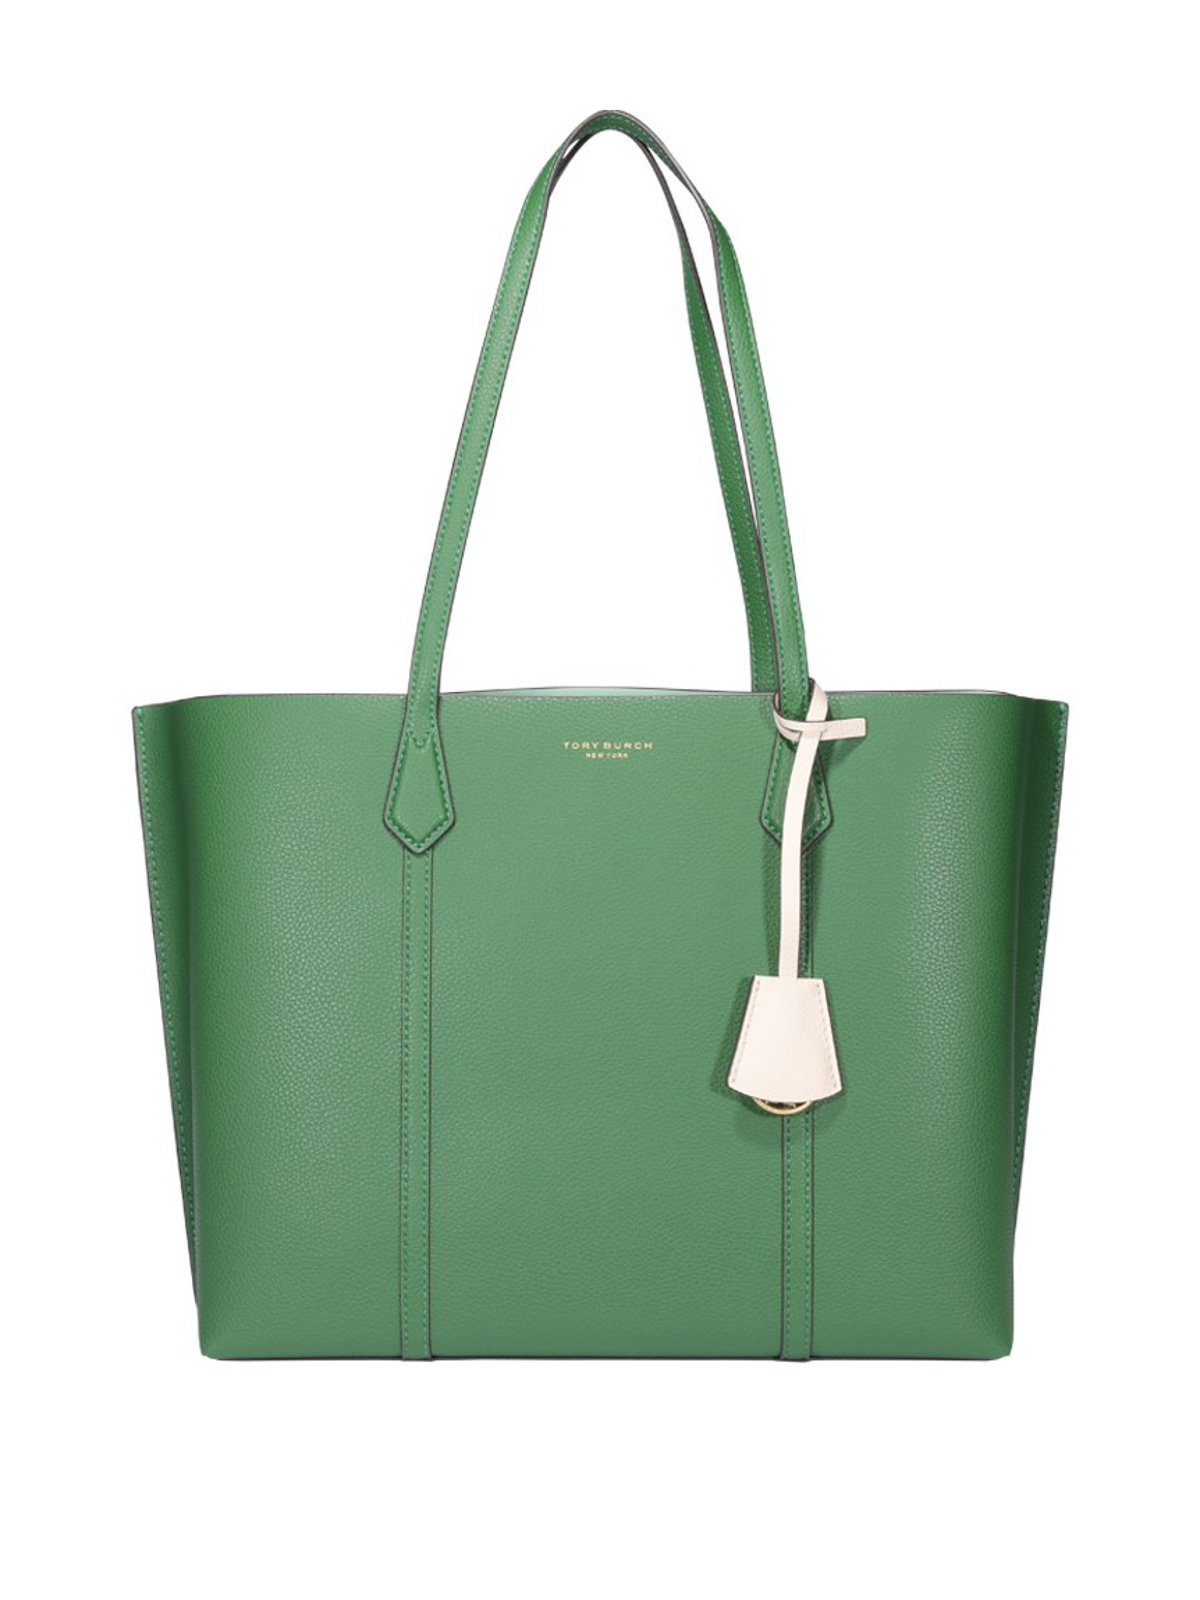 Totes bags Tory Burch - Perry green triple compartment tote - 53245367